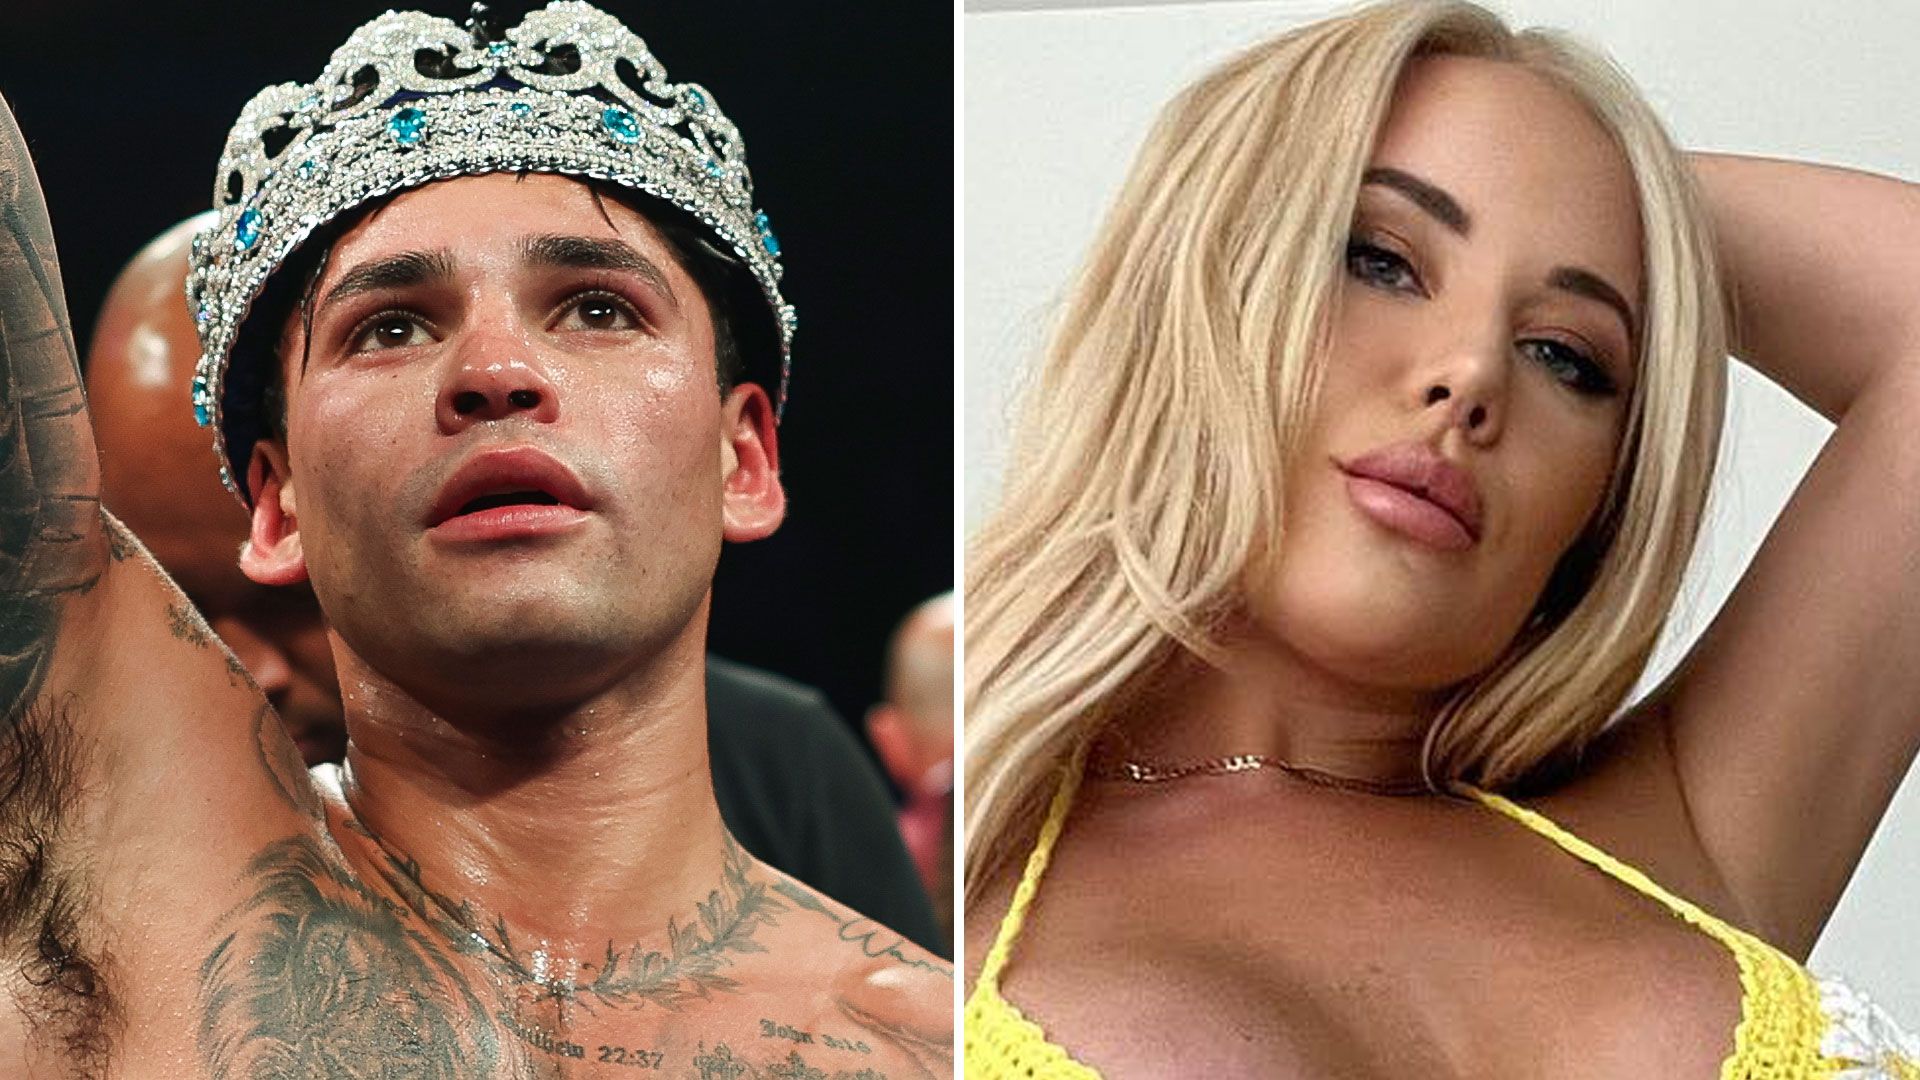 Inside Ryan Garcia’s rollercoaster week as boxer ‘drank every night’ and married porn star before amazing Haney upset [Video]